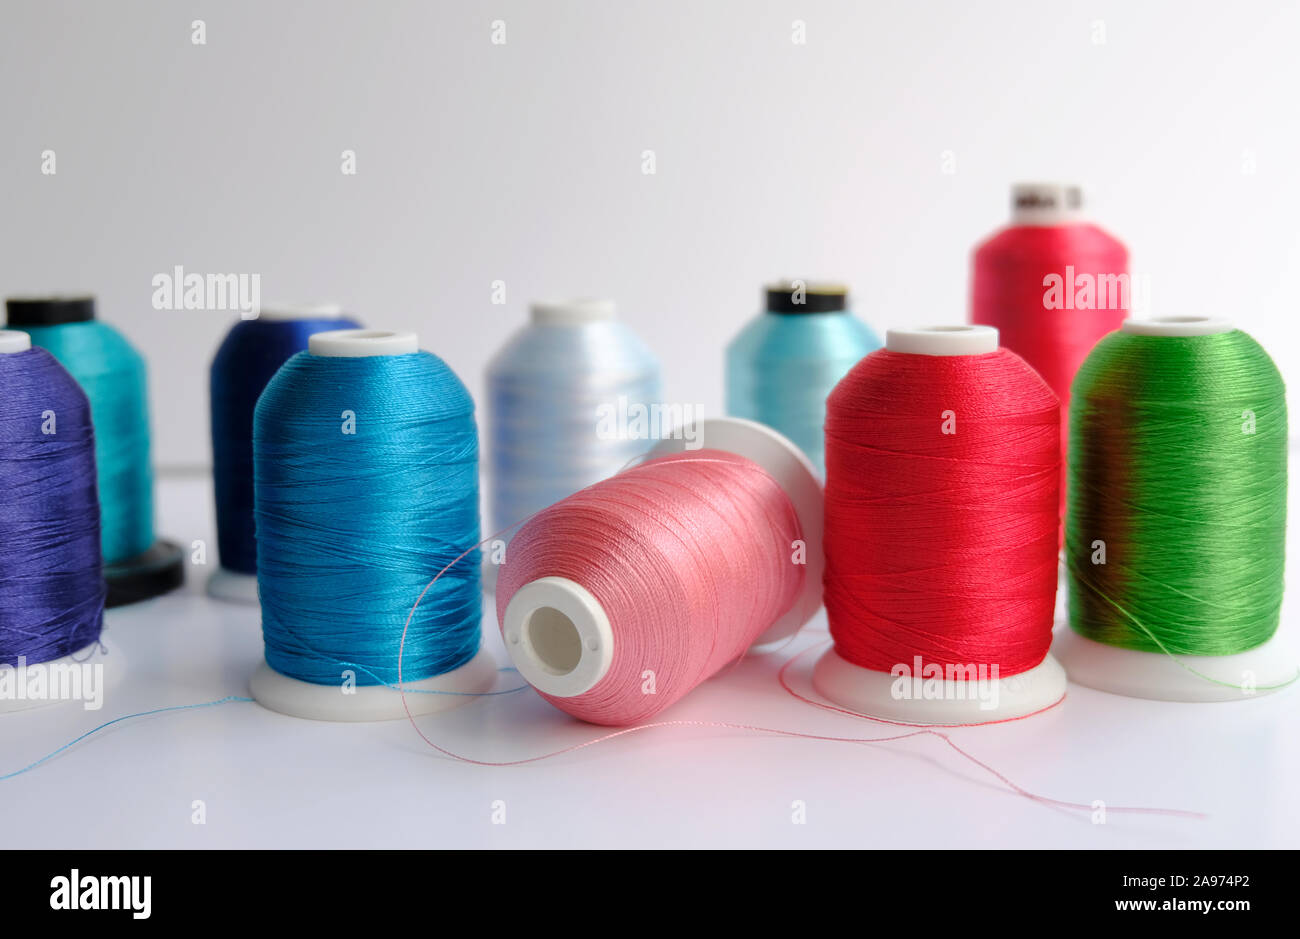 A collection of different coloured spools of domestic machine embroidery threads Stock Photo